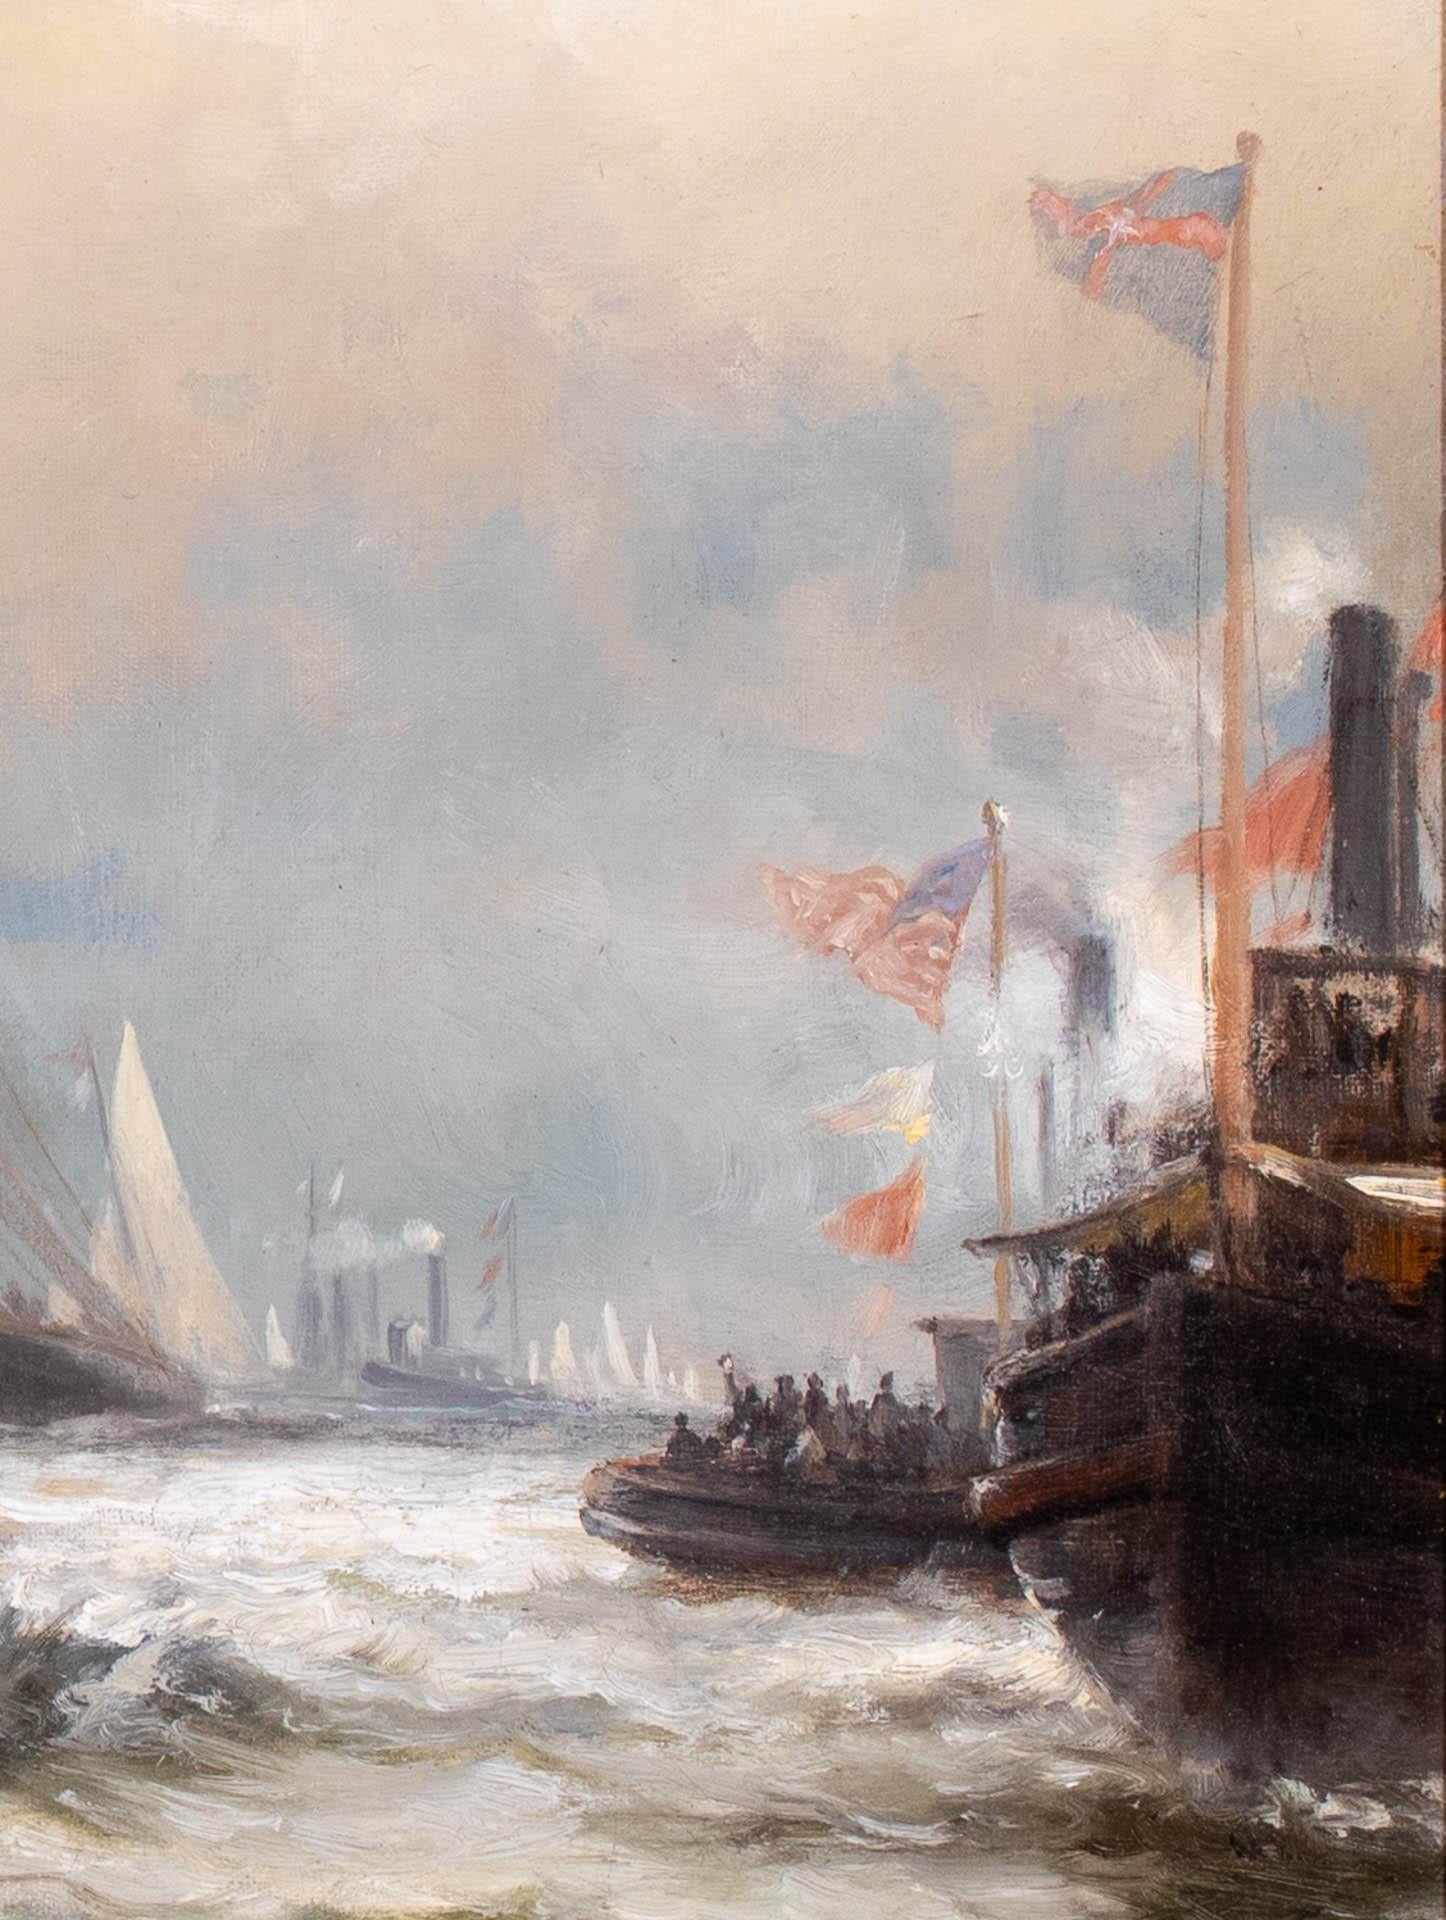 This impressive painting by Edward Moran does justice to the epic America’s Cup Challenge of 1885.  Moran’s point of view captures the day’s enormity to the world’s yacht racers and designers.  This account portrays PURITAN’s second and decisive